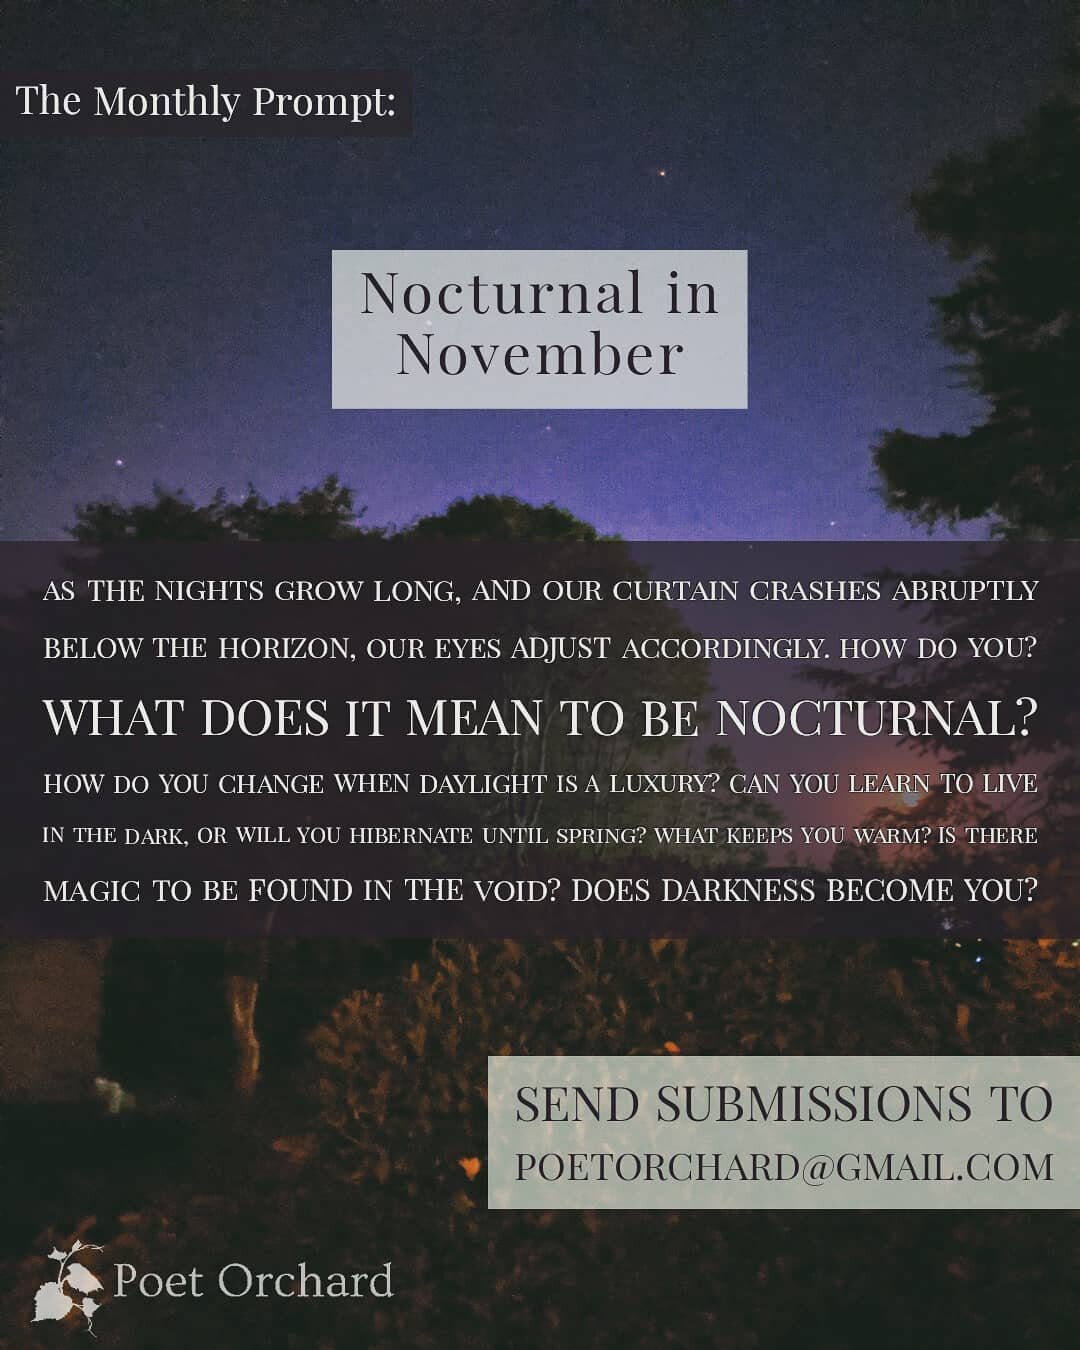 Daylight savings AND Election week, what a way to start off seasonal depression season! We were tempted to stay holed up, but instead we're using the lack of sunlight and general anxiety to fuel another prompt. 
November's inspiration: 🦇Nocturnal Ex